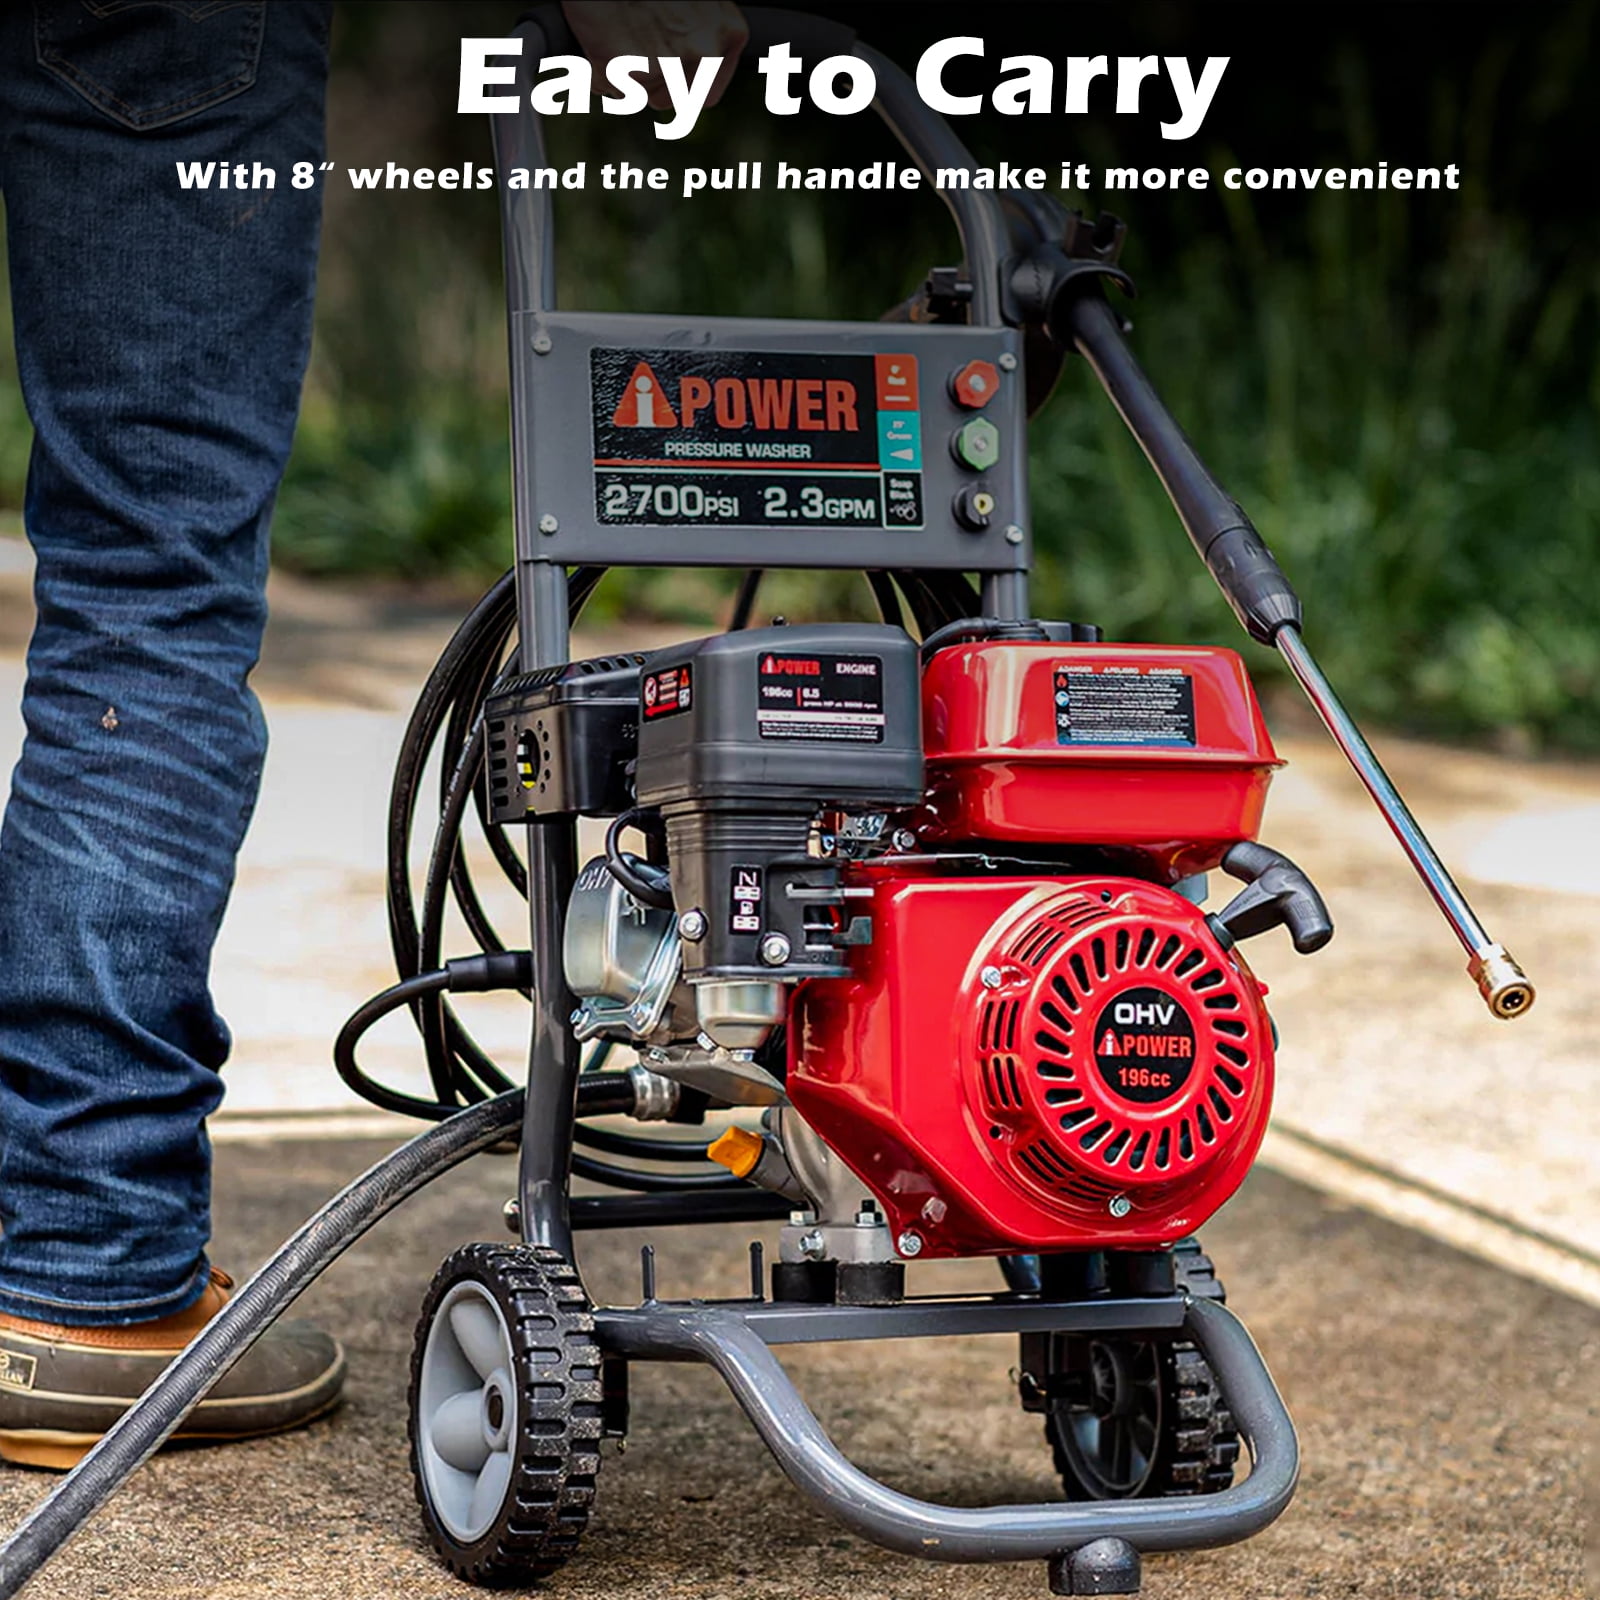 A-iPower 2700 PSI at 2.3 GPM 196cc 4-Cycle OHV Gas Powered Cold Water Pressure Washer - 2